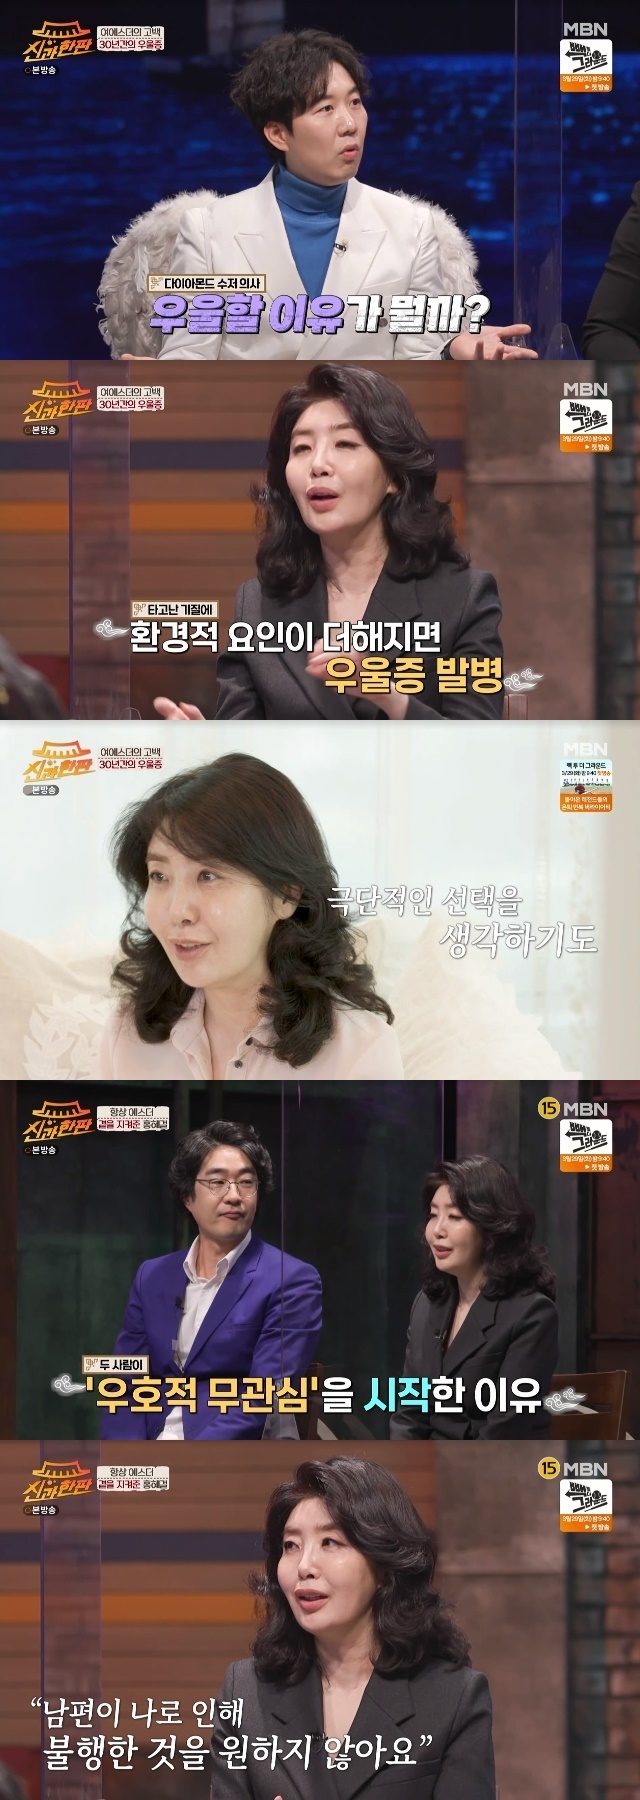 Yeo Esther, a businessman who was born as a DIA spoon and now earns 100 billion won, but depression from temperament and environment was inevitable.The family medicine specialist Yeo Esther has revealed that she is separated from her husband Hong Hye-geol for the reason of friendship indifference because of the depression.In the 9th MBN entertainment God and the Blind broadcast on March 25, Hong Hye-geol and Yeo Esther appeared as guests and performed a hot talk on the basis of various keywords expressing themselves.On this day, Yeo Esther honestly revealed that she was born with DIA Month spoon, not silver spoon or gold spoon.My grandfather bought a Deagu Ilbo press company in Deagu, and started Cheil Industries with the late Lee Byung-chul (Samsung founder), Yeo Esther said.Thanks to this, the young Esther grew up in a 200-pyeong, 800-pyeong yard, a pond with a babysitter, a butler, a knight, and a nanny.But there was also a crisis in the family: political retaliation. His grandfather was close to the late President Park Chung-hee and Mrs. Yook Young-soo, but his father had a strong temperament.In 1971, during the 7th presidential election, the father, who was the planning director of the Deagu Ilbo, secretly photographed the propaganda of the late President Kim Dae-jung, who did not carry any newspaper in Deagu,This led to his father being taken to the Central Intelligence Agency of the Angibu, and his grandfather visited the late President Park Chung-hee, but he was not only tortured but was ordered to be deported.All but one of the businesses of the Yeo Esther family was transferred to the Asset Management Corporation.Just because my grandfather couldnt get his foot on (Korea) until he died, I was able to return to Korea then (from Japan) when he died of stomach cancer, Yeo Esther recalled.Yet, Yeo Esther, who chose the path of doctor with her mothers foresight, entered Seoul National University Medical School and became a family medicine specialist.At the age of 30, he married Hong Hye-geol and had two sons; now he has also turned into a businessman, achieving 100 billion won last year.Yeo Esther, who grew from 50 billion won last year, was working on 200 billion won this year.This depressive Confessions of such a well-known doctor and businessman Yeo Esther was somewhat shocking to MCs: Yeo Esther said, Do you have a DIA Month Suzer doctor?Depression has a natural temperament, and there should be events that draw matches that cause it.I had a lot of bends in my house, and because of Confucian education, other houses used calligraphy when watching TV entertainment on weekends.There is a lot of discipline, the cushion should sit in the middle, the woman should not step on the threshold, never go out when she goes to school, never swear.I came into the painter and I was very depressed. The time of Yeo Esthers depression was as soon as she got a specialist.Yeo Esther said, Before I picked up a specialist, I worked hard, thinking, If I become a specialist, I have something beyond the rainbow hill.Then there was a great depression, and then I met my husband and married him without knowing whether it was good or bad. Actually, Yeo Esther accepted the proposal of Hong Hye-geol, who had just met because she was an old maid, and she had a fast wedding ceremony in 94 days.Hong Hye-geol, who has watched the depression of Yeo Esther from the side, said, My wife is a sporty performer when she goes to an entertainment show.I dont even move. I dont even say anything. I feel stuffy about all the places with black curtains in the evening.Yeo Esther said, I lived diligently as a doctor, working hard and having to raise a child well.And now the kids are in the military, they graduate from college, and my favorite sister is dead two years ago.The power to support me was to care for, raise and protect someone, which (and these) were the factors that motivated me to live, and that was gone.So, in fact, I was so sorry for my husband that I had a lot of bad thoughts. But Yeo Esther did not move extreme thoughts into action.It was because he knew so well the sense of loss and sadness that people around him would experience if he lost himself.Hong Hye-geol said: Homones are genetically or environmentally separated.People who do not envy even if they have it all suddenly think that they are futile and act wrong. Yeo Esther apologized to Hong Hye-geol for saying she was sorry.Yeo Esther referred to medical treatment and exercise as a way to overcome depression.Yeo Esther, who is constantly visiting the hospital for treatment, said: The medication that is sprayed on the nose is originally an anesthetic, but when you go to treatment, it becomes dissociative for two hours.It is not easy to go to such treatment, but given the pain I give to my family, I try to actively receive the treatment, work hard and see the sunlight. I was actively receiving that treatment and felt the calm happiness for the first time in my life. This is normal, I have always been depressed.When Im so depressed, I sometimes ask my husband (in Jeju Island) for help, and he says, Will I go up right now? In a word, Im very helpful.I have a husband who will come to Seoul immediately when I am in trouble. Then I will answer I will try more exercise, I will raise the medicine. Yeo Esther said, So the reason why I actually started friendship indifference is that my husband has a lump in his lungs and he does not want his husband to be unhappy with me anymore.Her husbands rough eyes are painful when they see me in a gloomy way.If you call separately, you can make your voices brighter. 